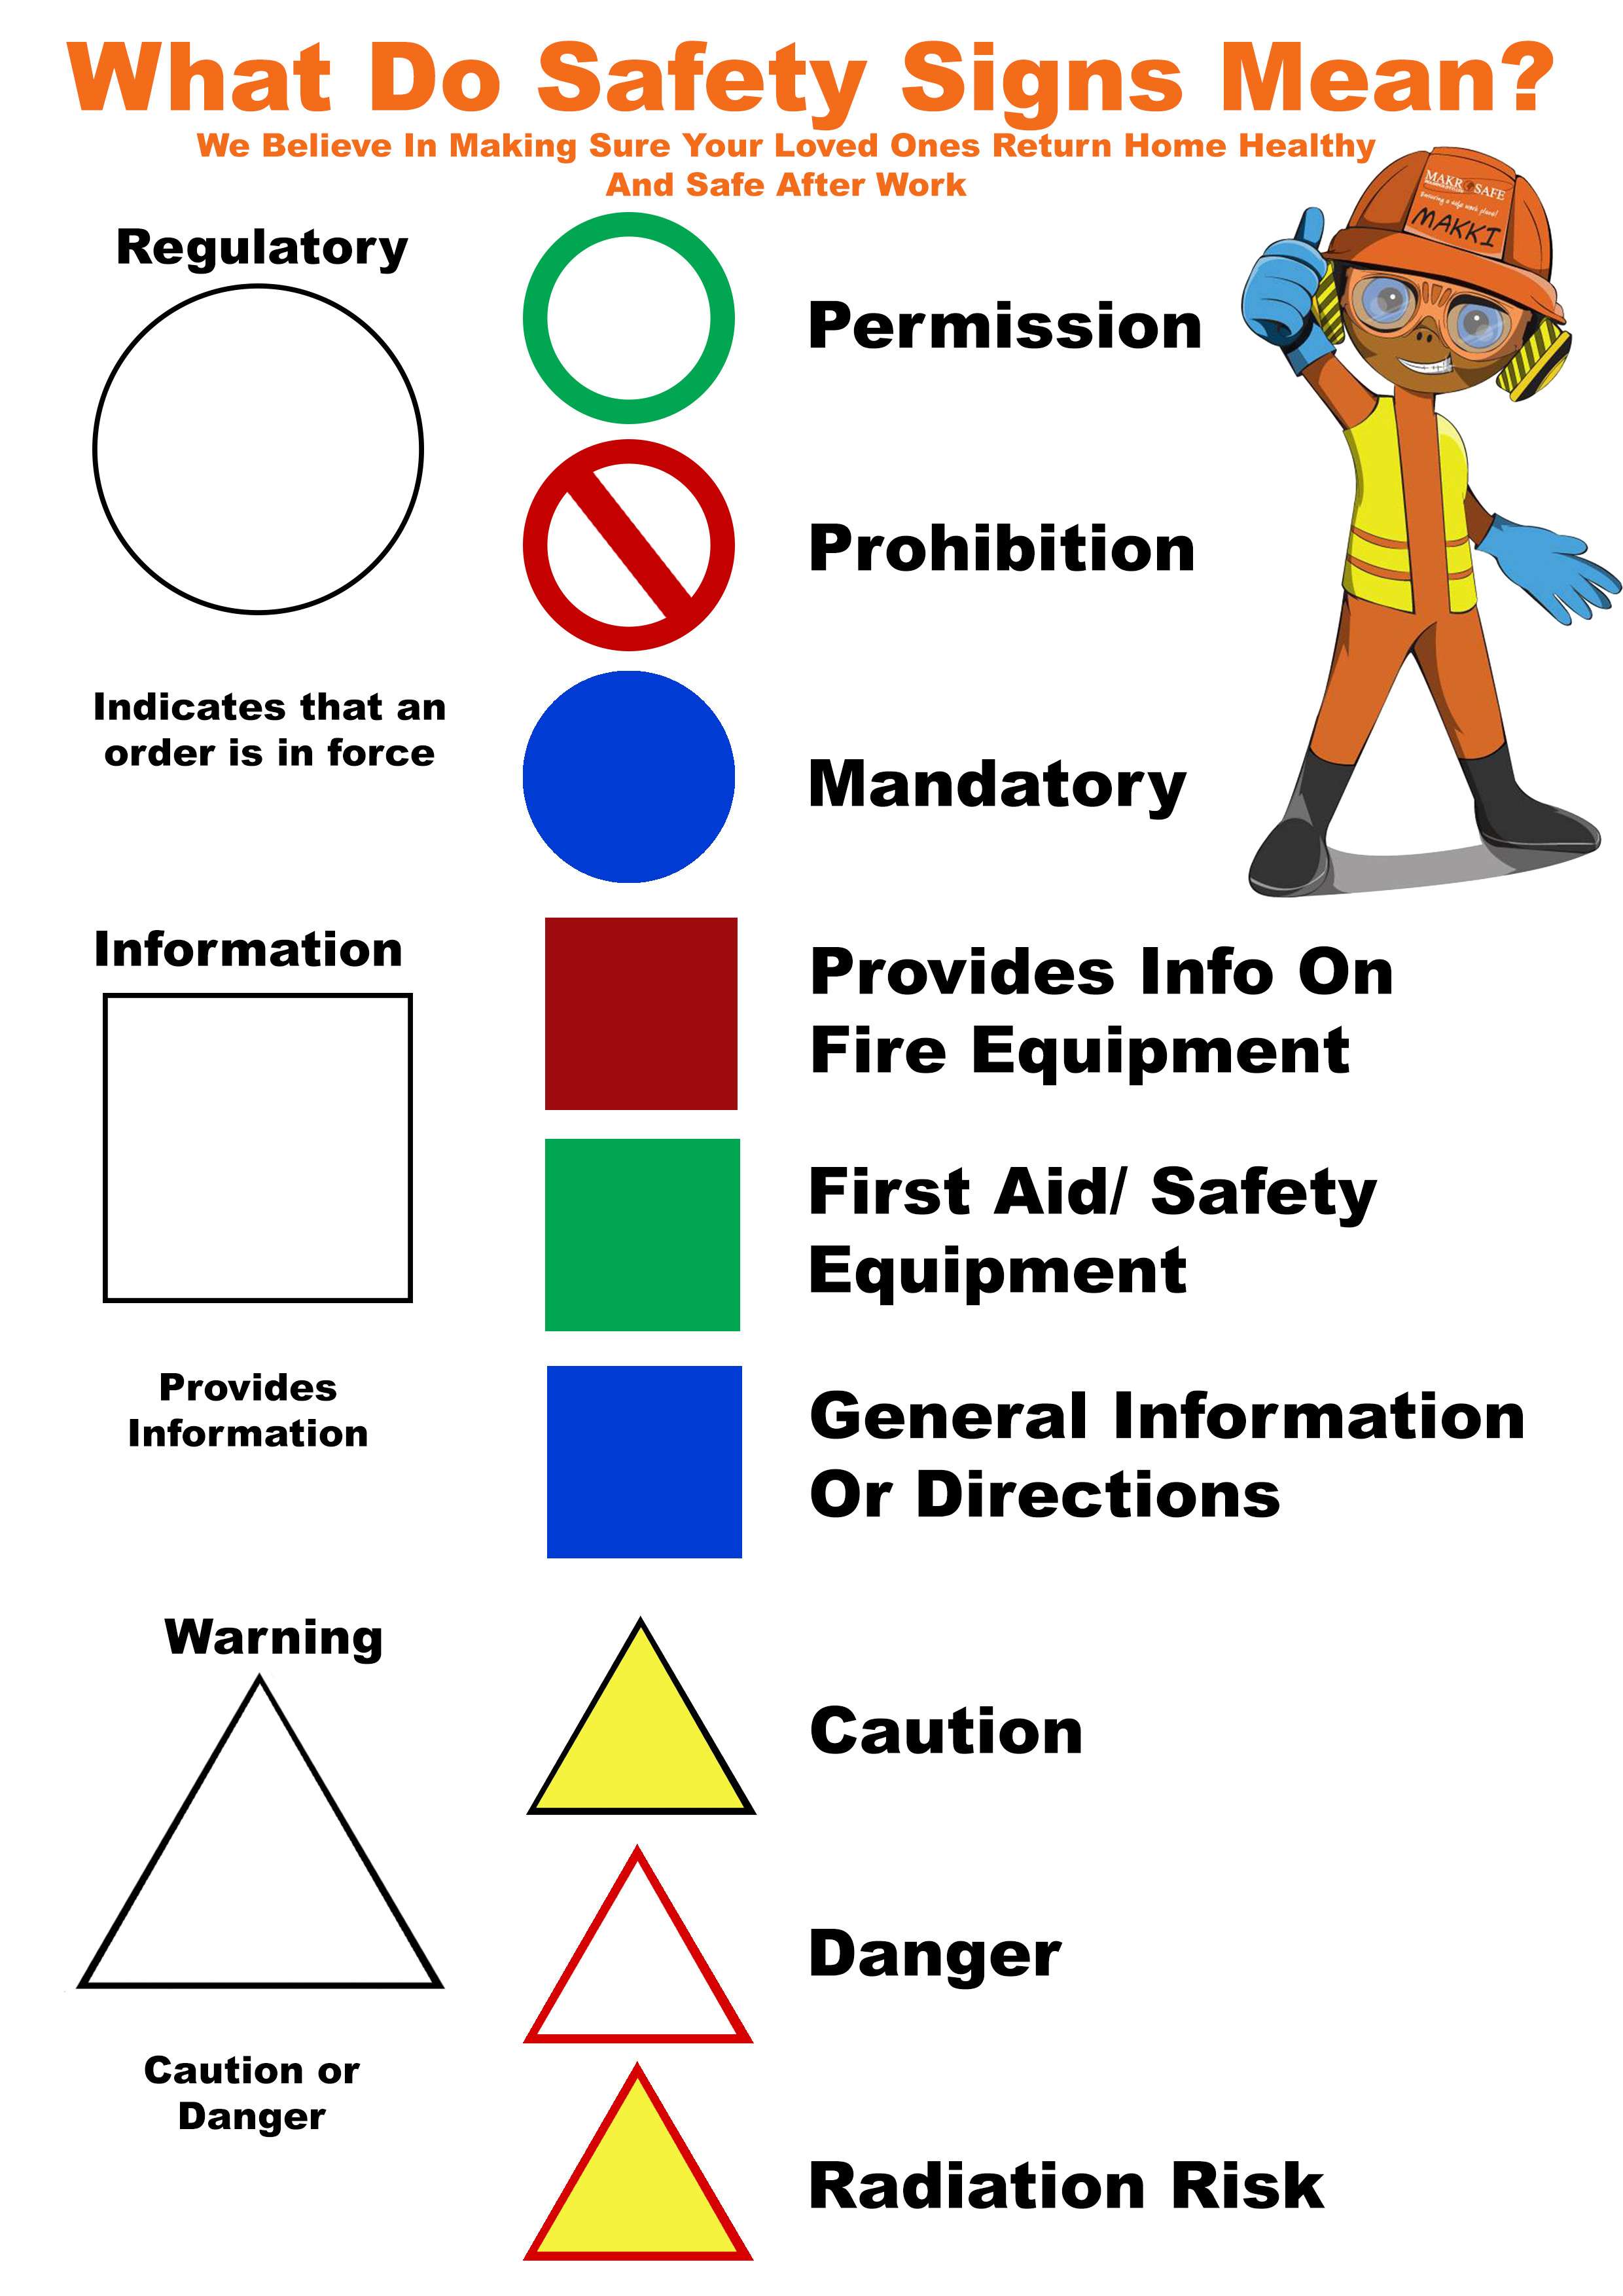 What Do Safety Signs Mean?